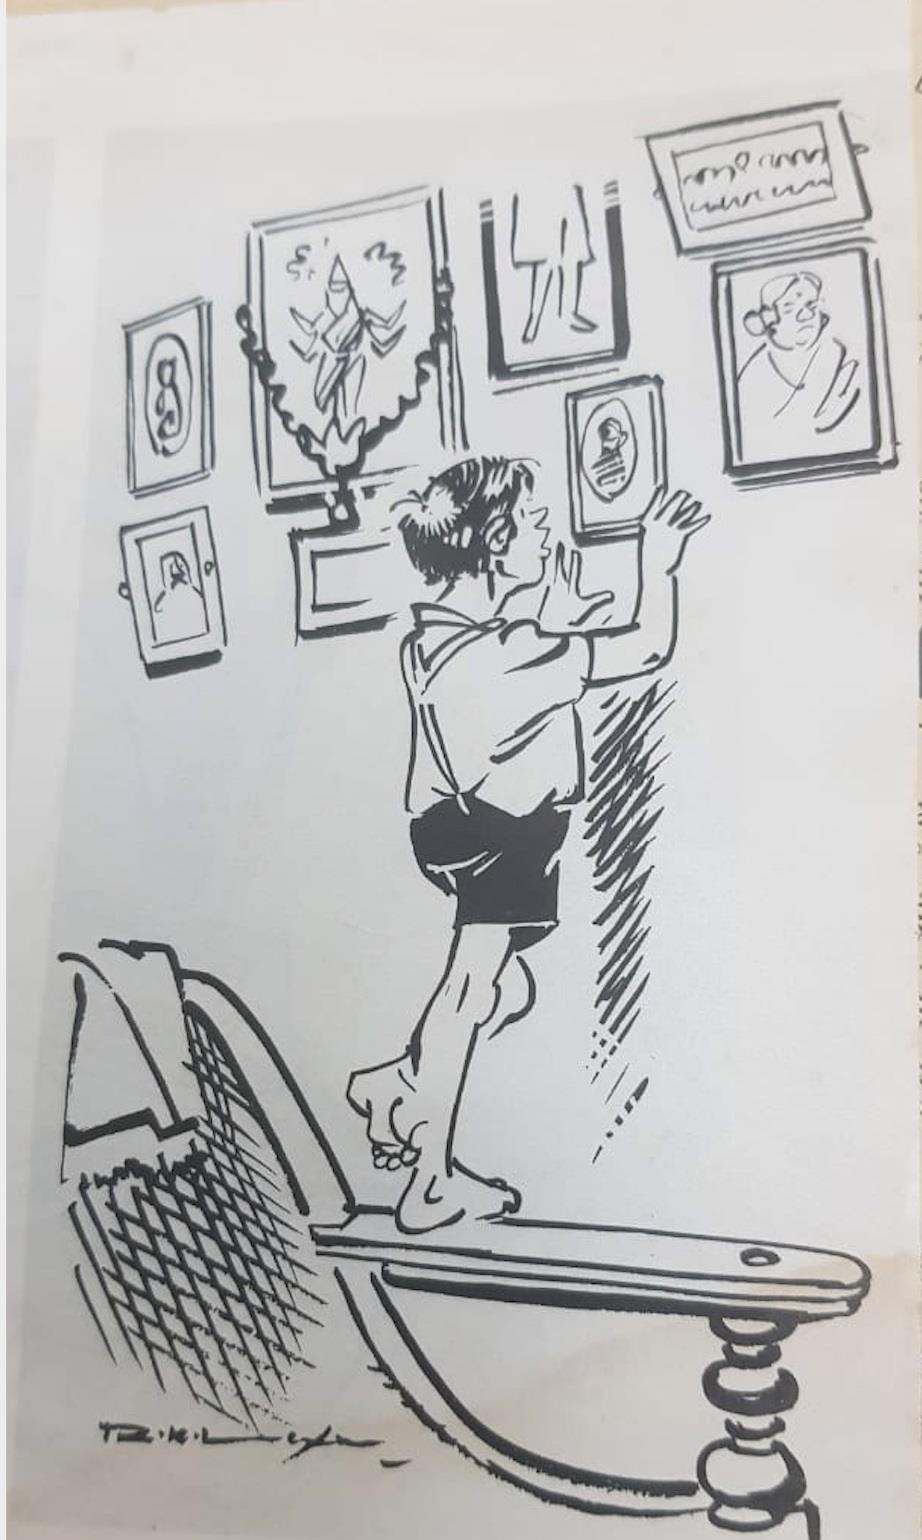 Remembering the legendary cartoonist RK Laxman in his birth centenary year